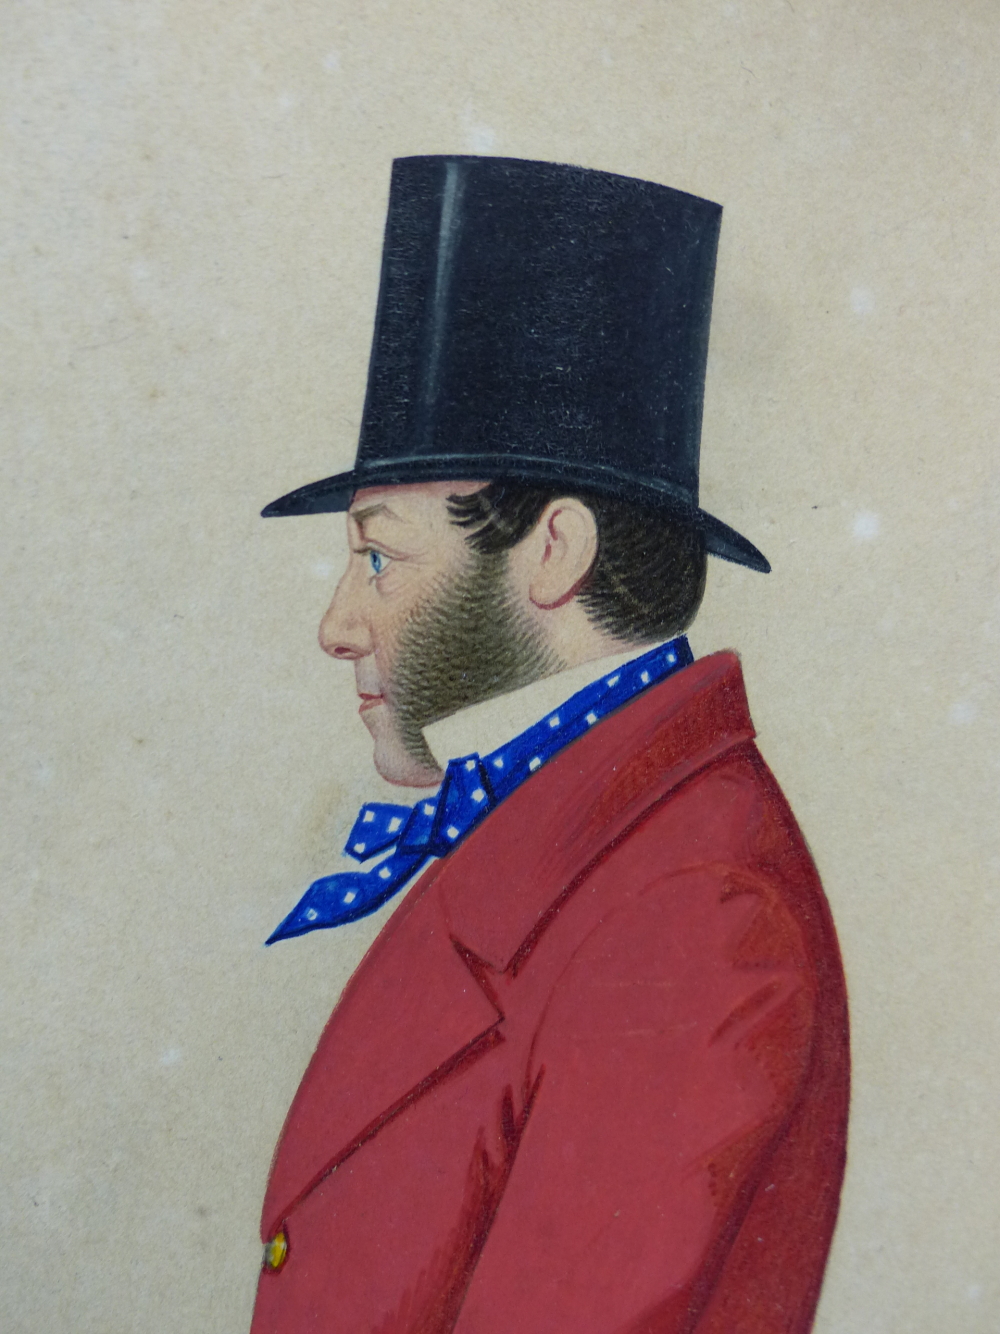 JOSHUA DIGHTON (1831-1908). MINIATURE PROFILE PORTRAIT OF A GENTLEMAN ON A HORSE WEARING A RED COAT. - Image 6 of 6